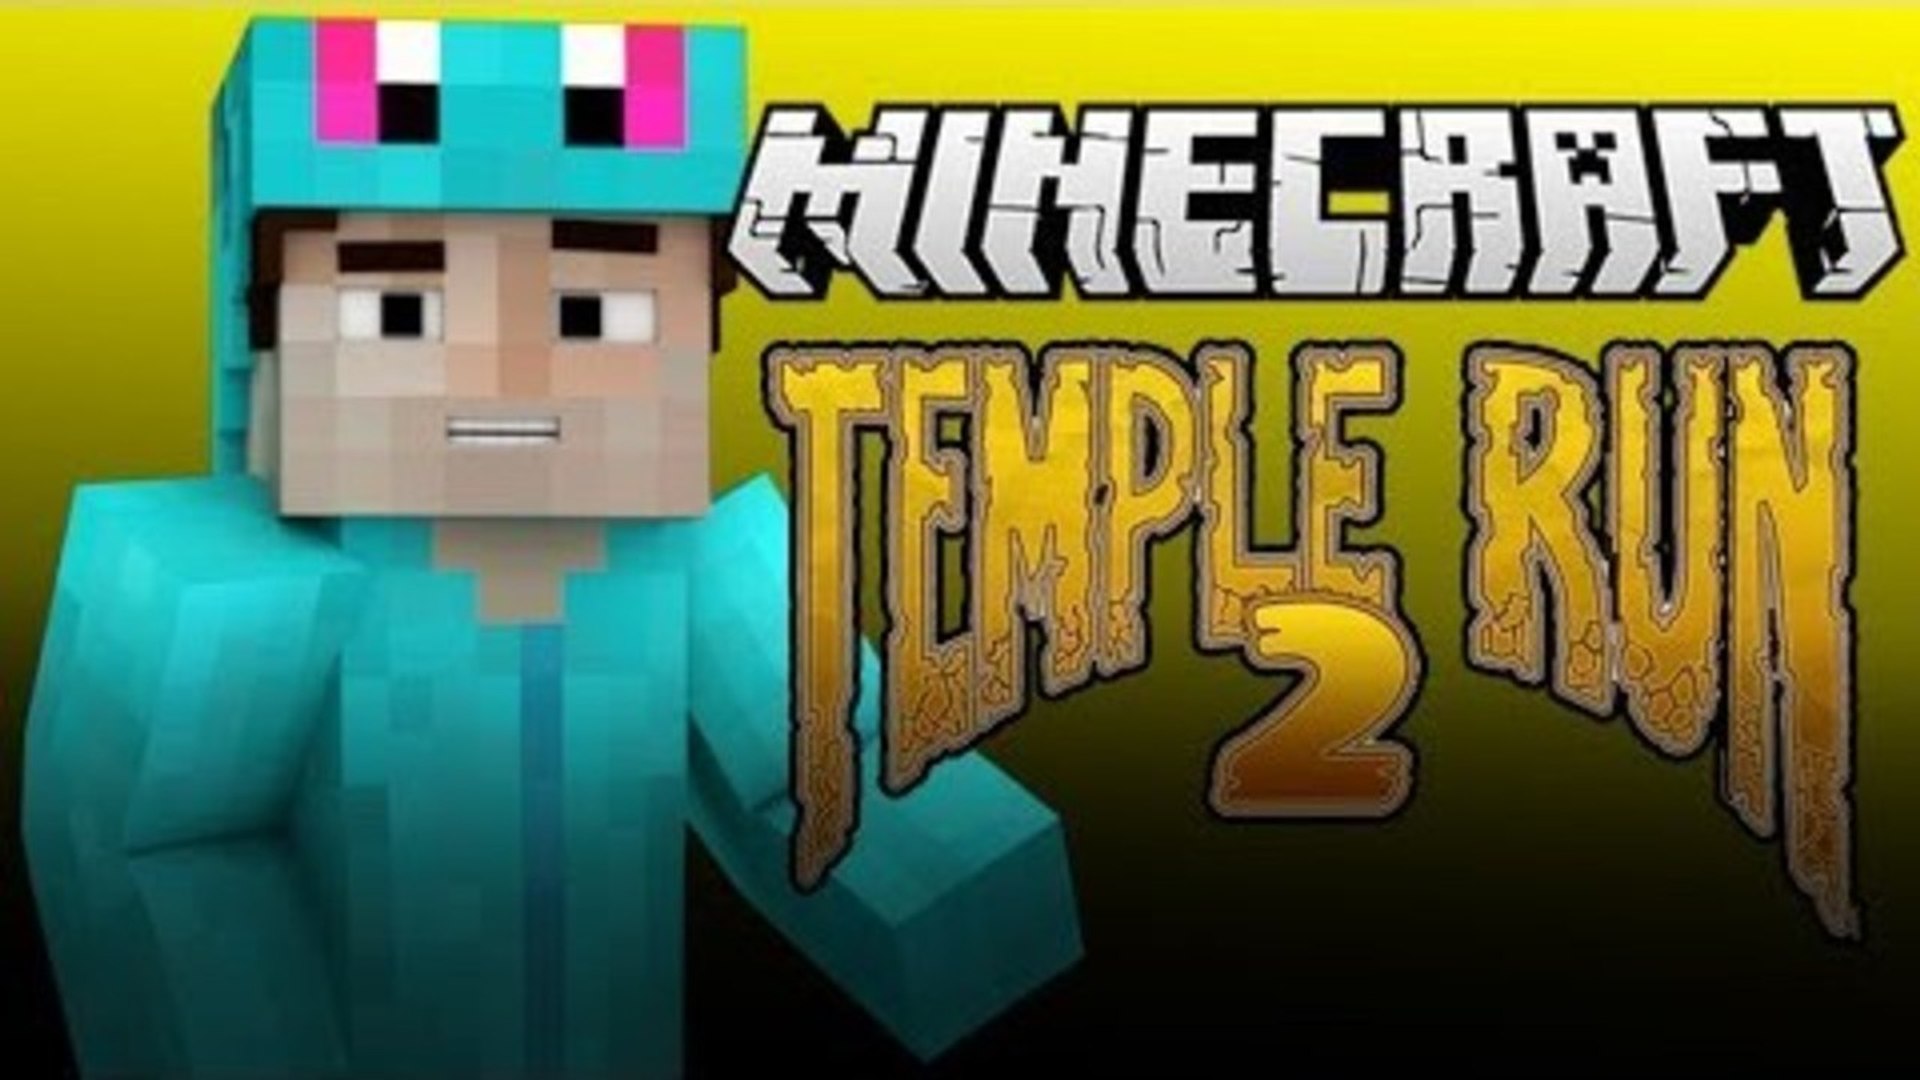 Minecraft Temple Run 2! - Maps - Mapping and Modding: Java Edition